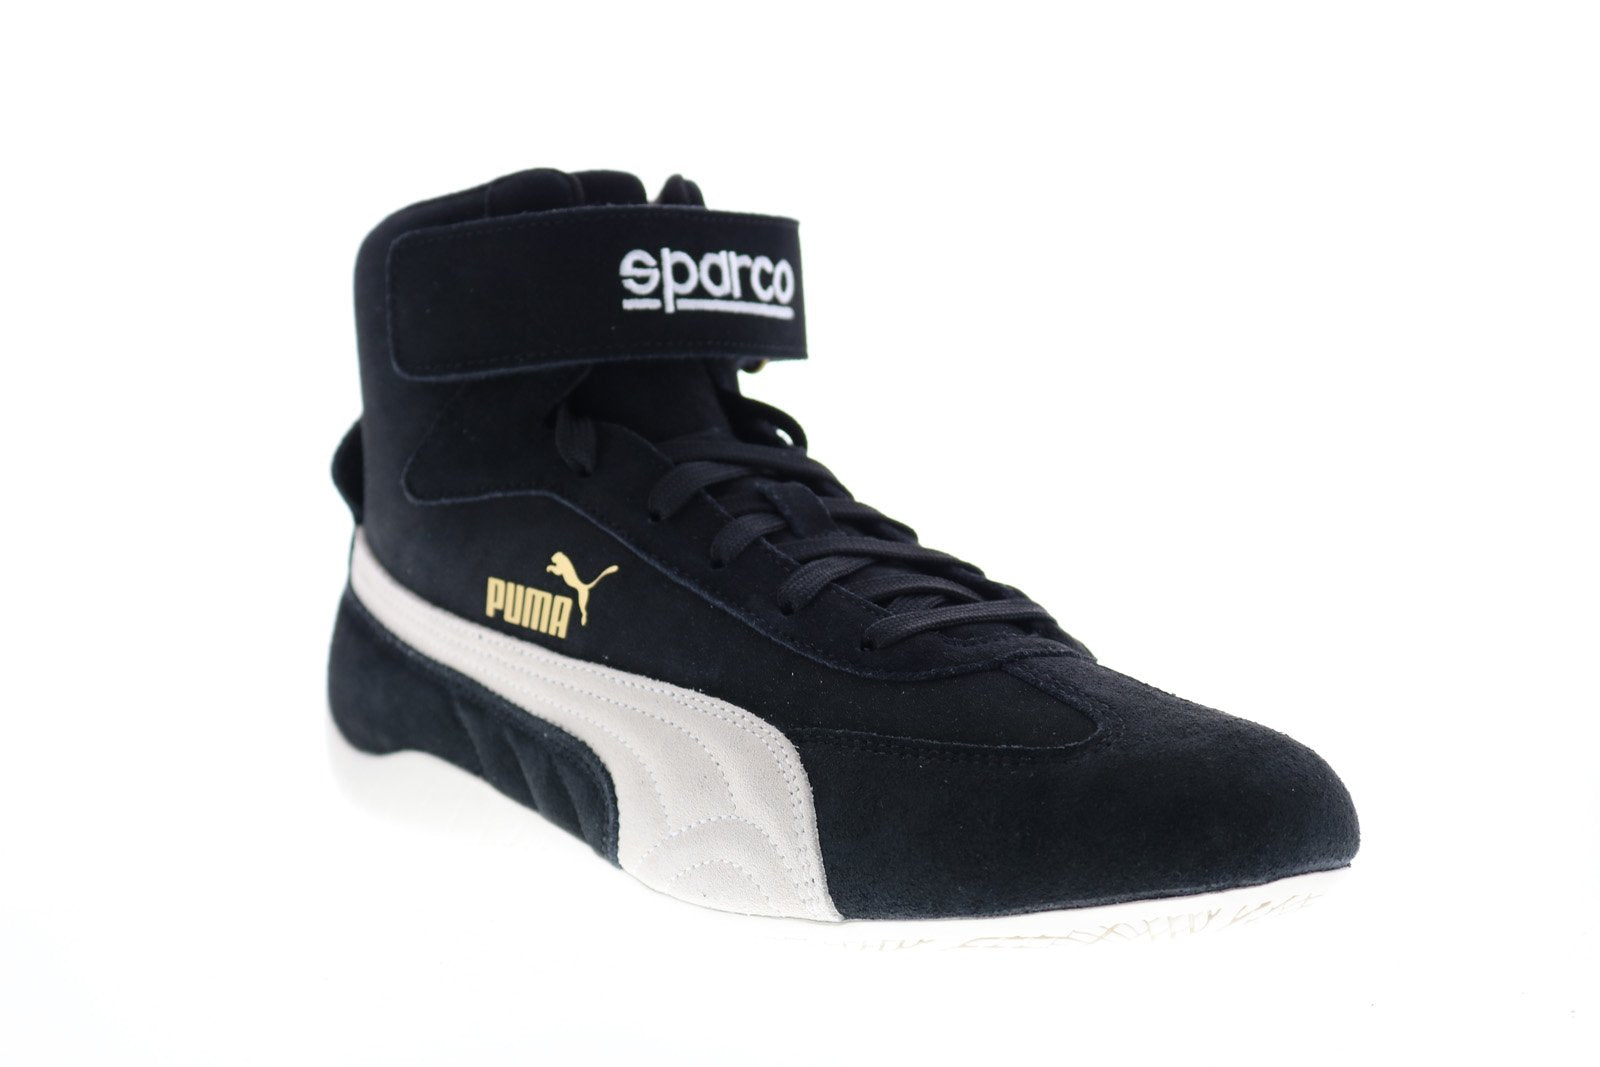 Puma Speedcat Mid Sparco 30660901 Mens Black Suede Lace Up Sneakers Mo ...